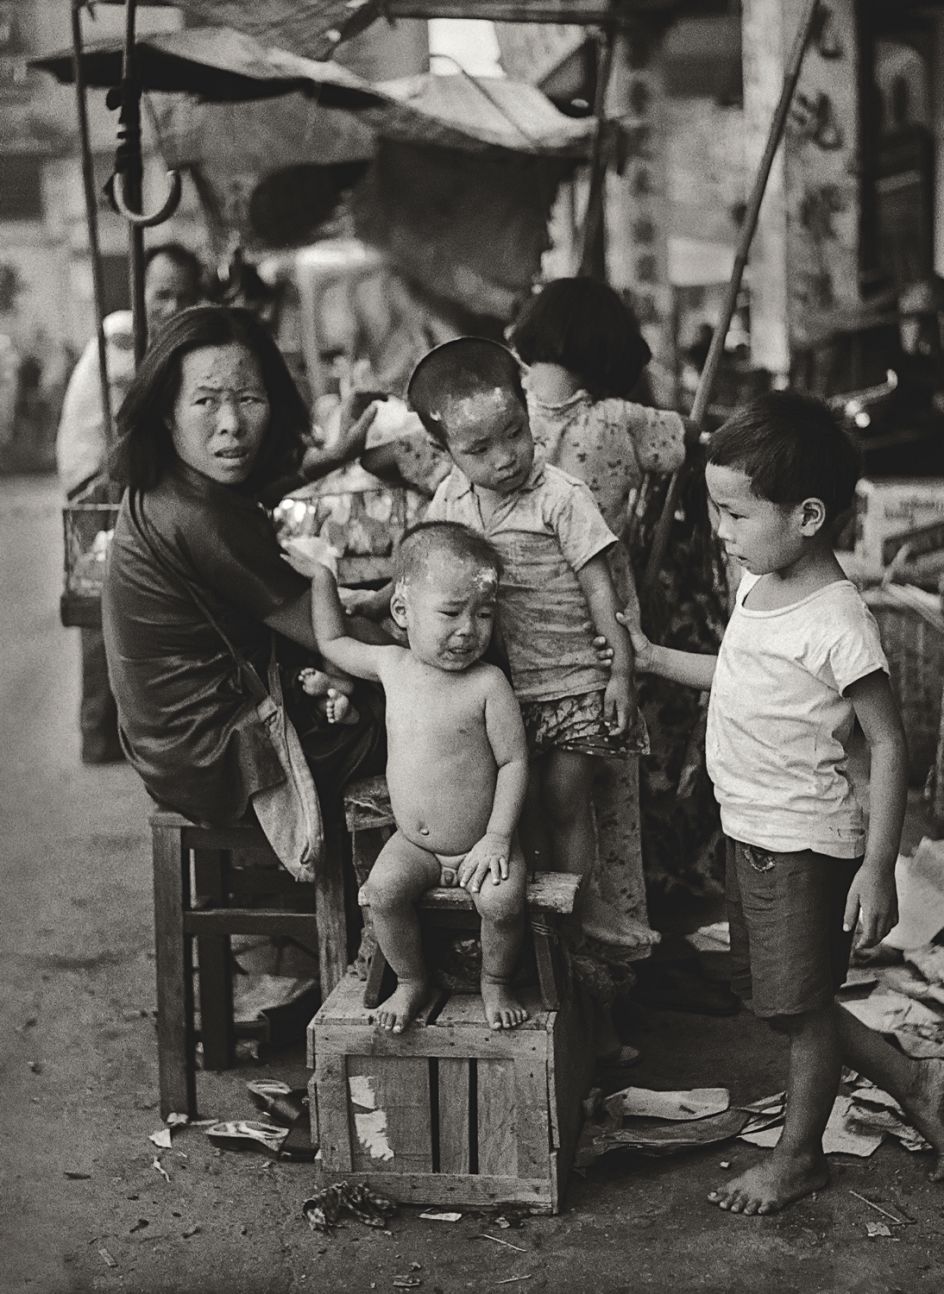 Fan Ho 'Five Little Ones(五個小孩的母親)' Hong Kong 1950s and 60s, courtesy of Blue Lotus Gallery